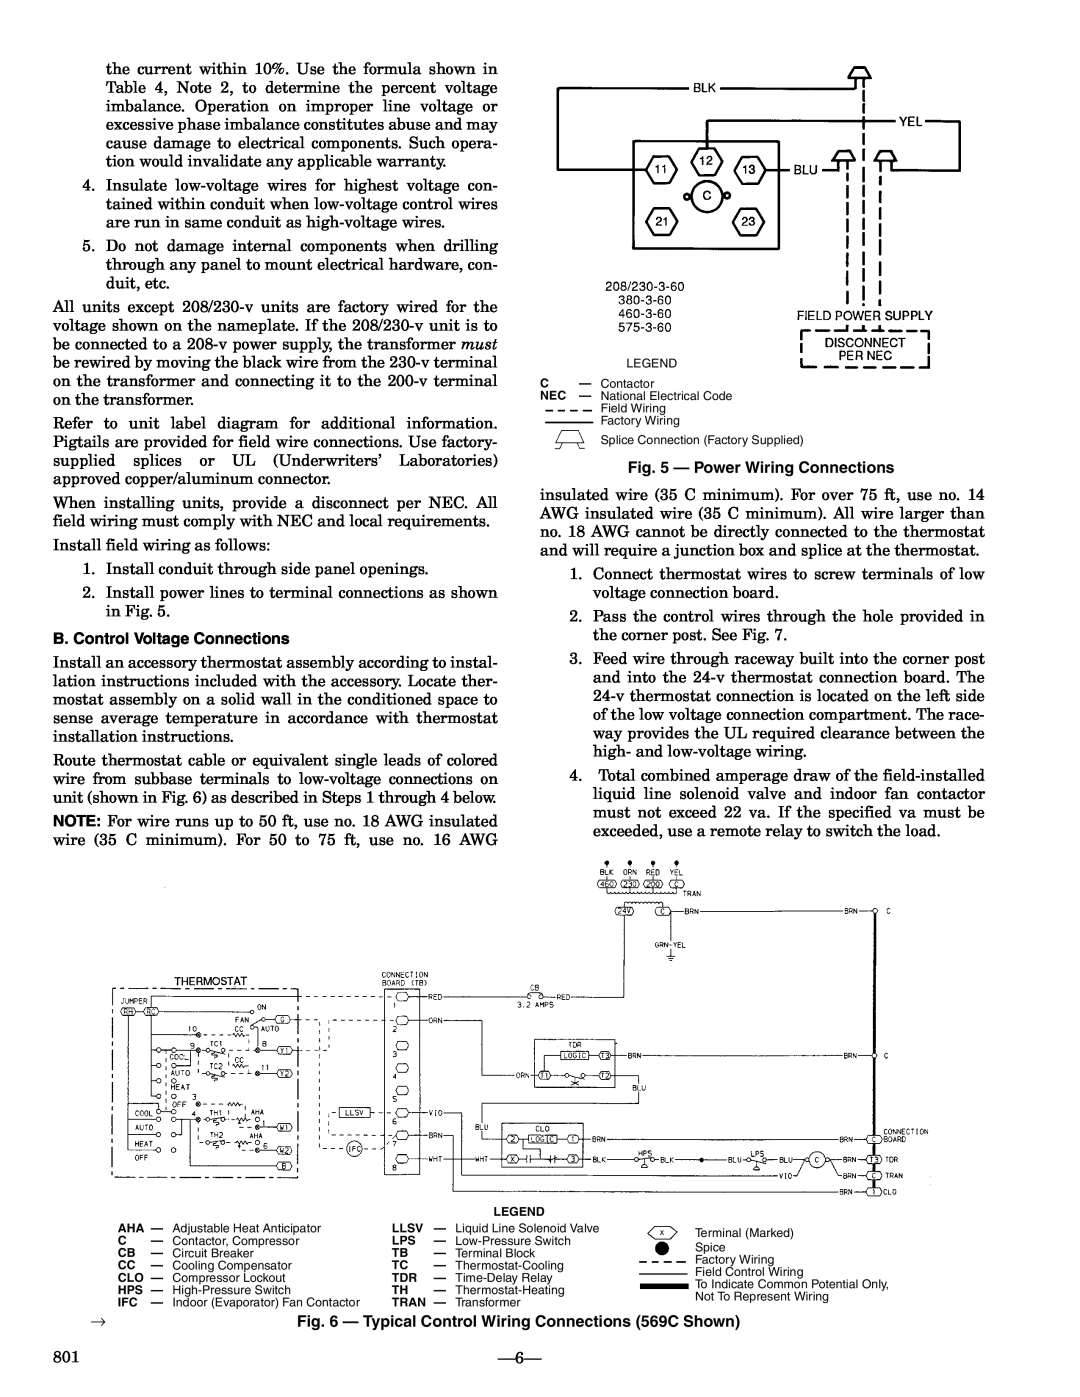 Bryant 576b installation instructions B.Control Voltage Connections, Power Wiring Connections 